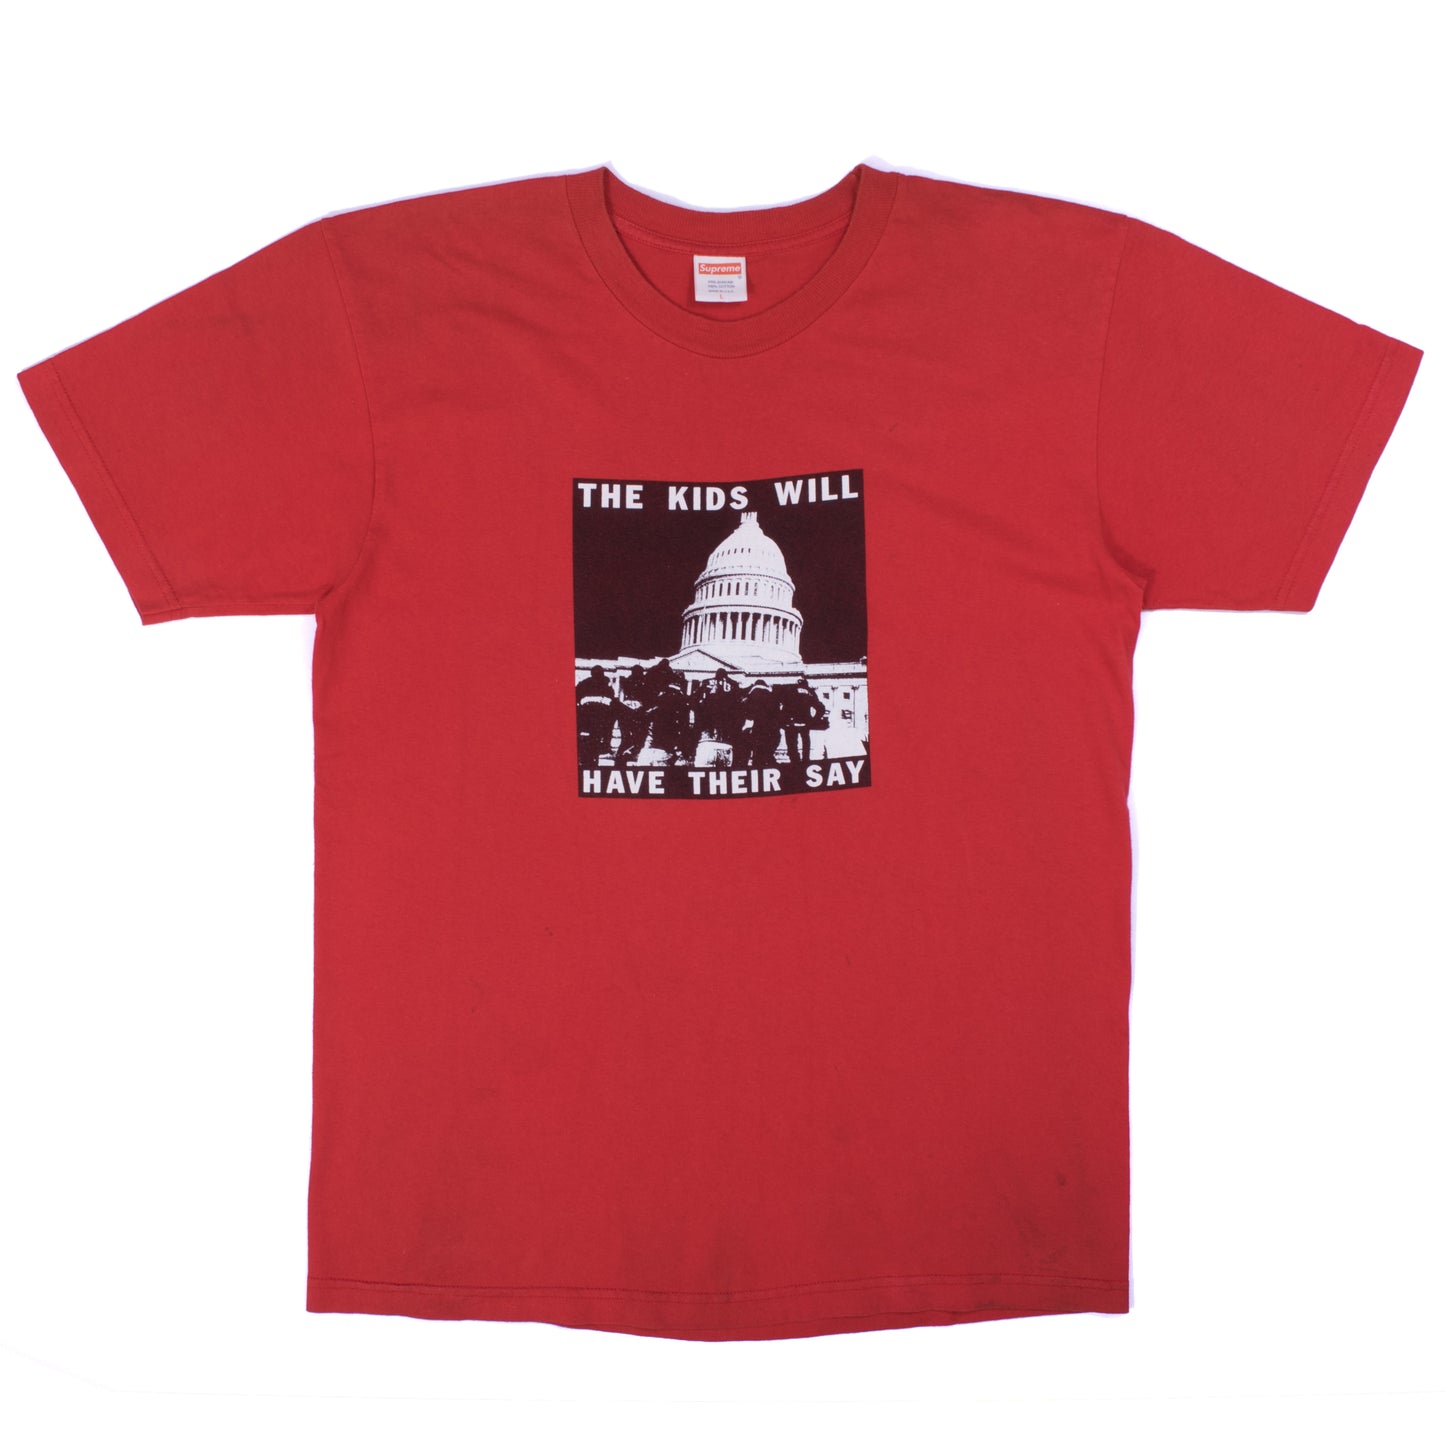 Supreme "The Kids Will Have Their Say" T-Shirt (2008SS) [Check condition]